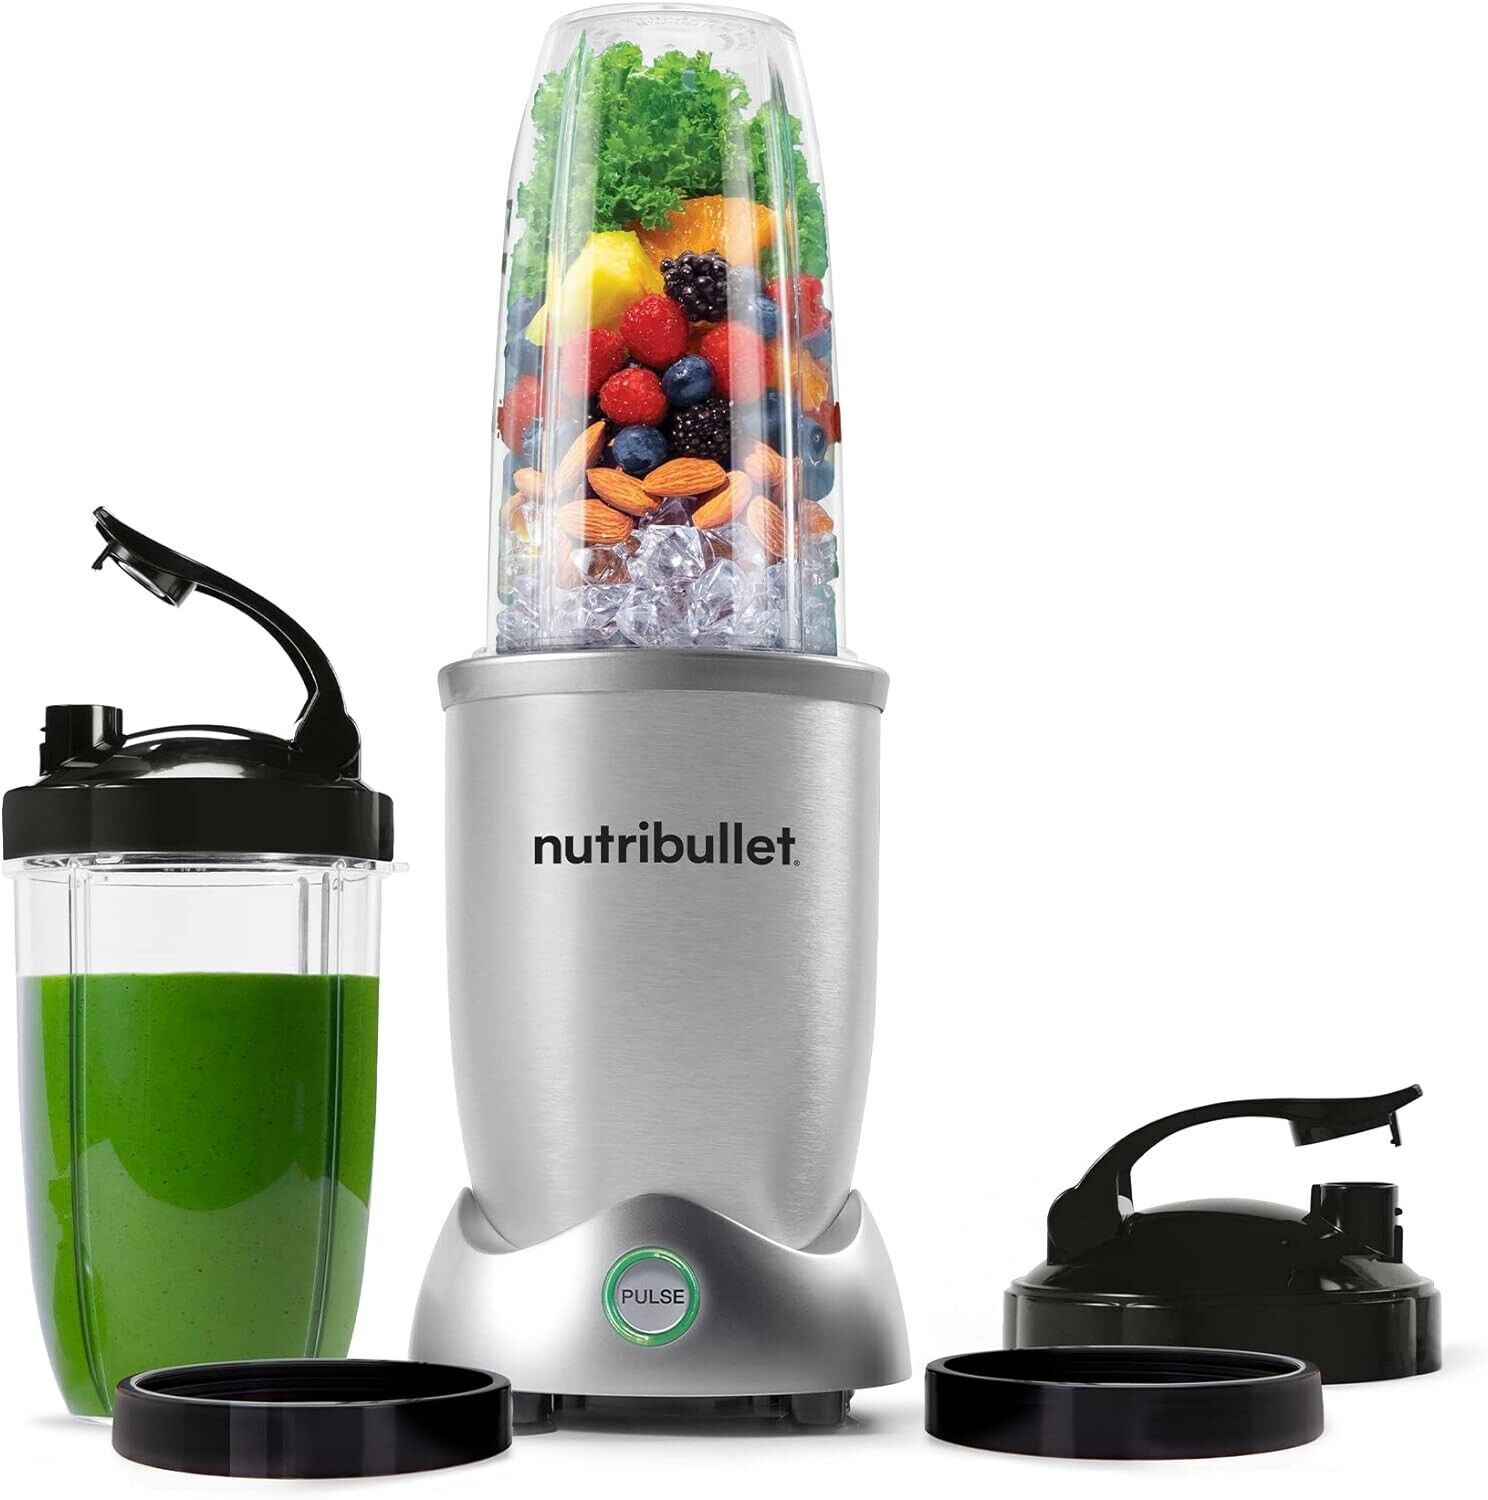 NutriBullet Pro+ 1200W Personal Blender with Pulse Function in Silver